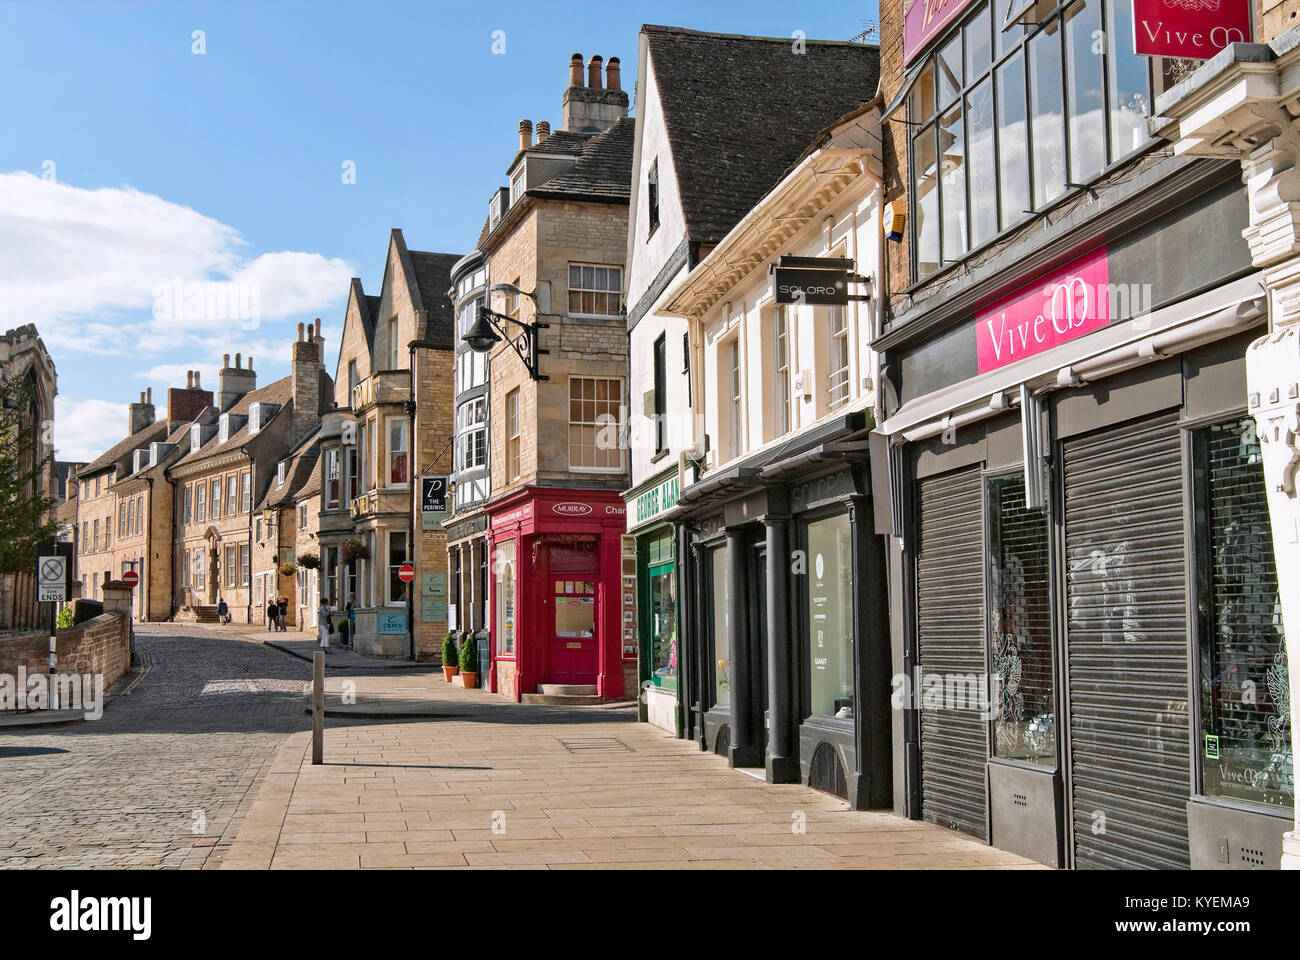 Old town of Stamford, an ancient town located north of London, England, UK Stock Photo